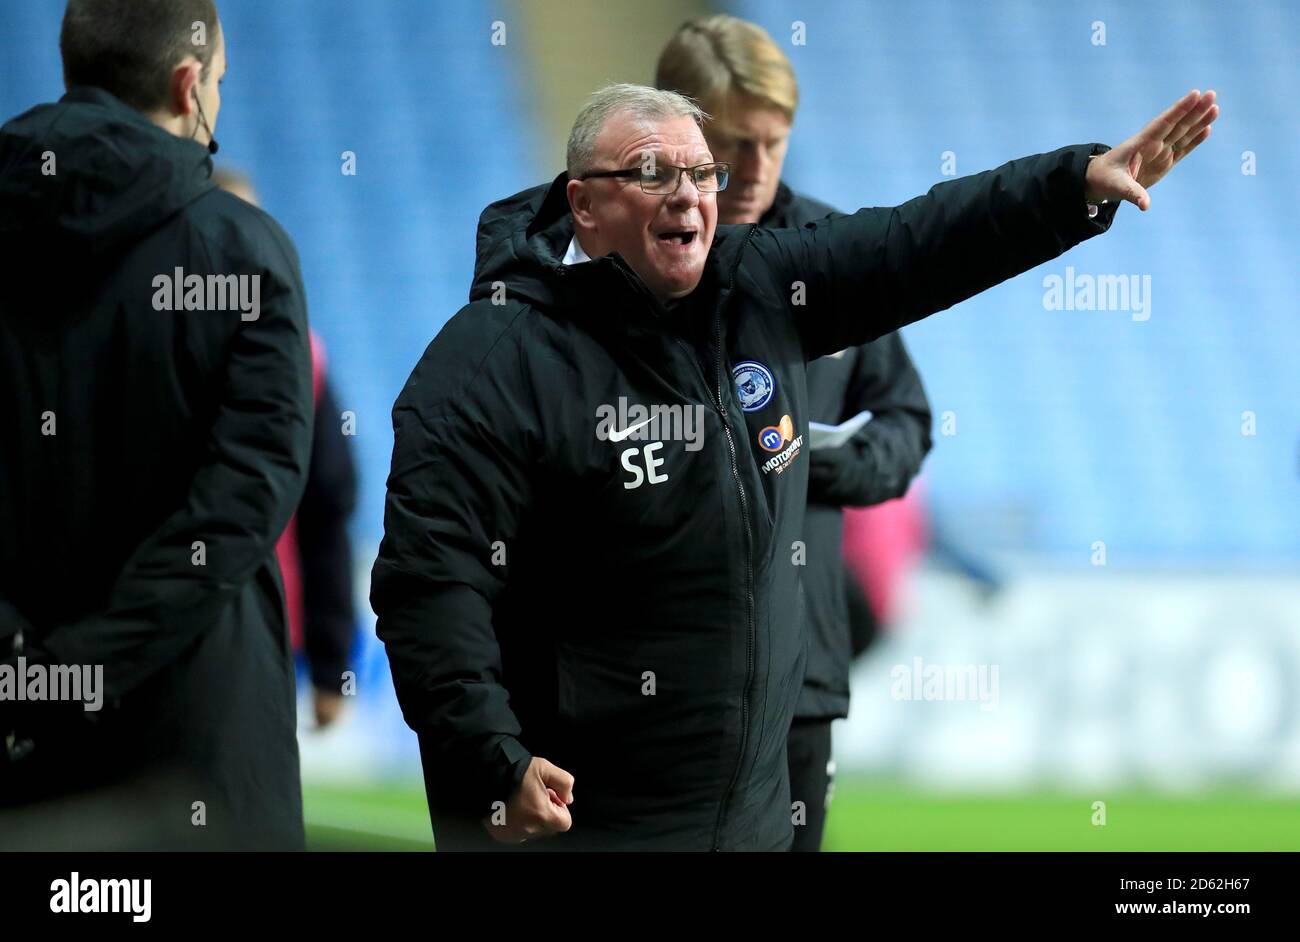 Peterborough United's Manager Steve Evans gestures on the touchline Stock Photo